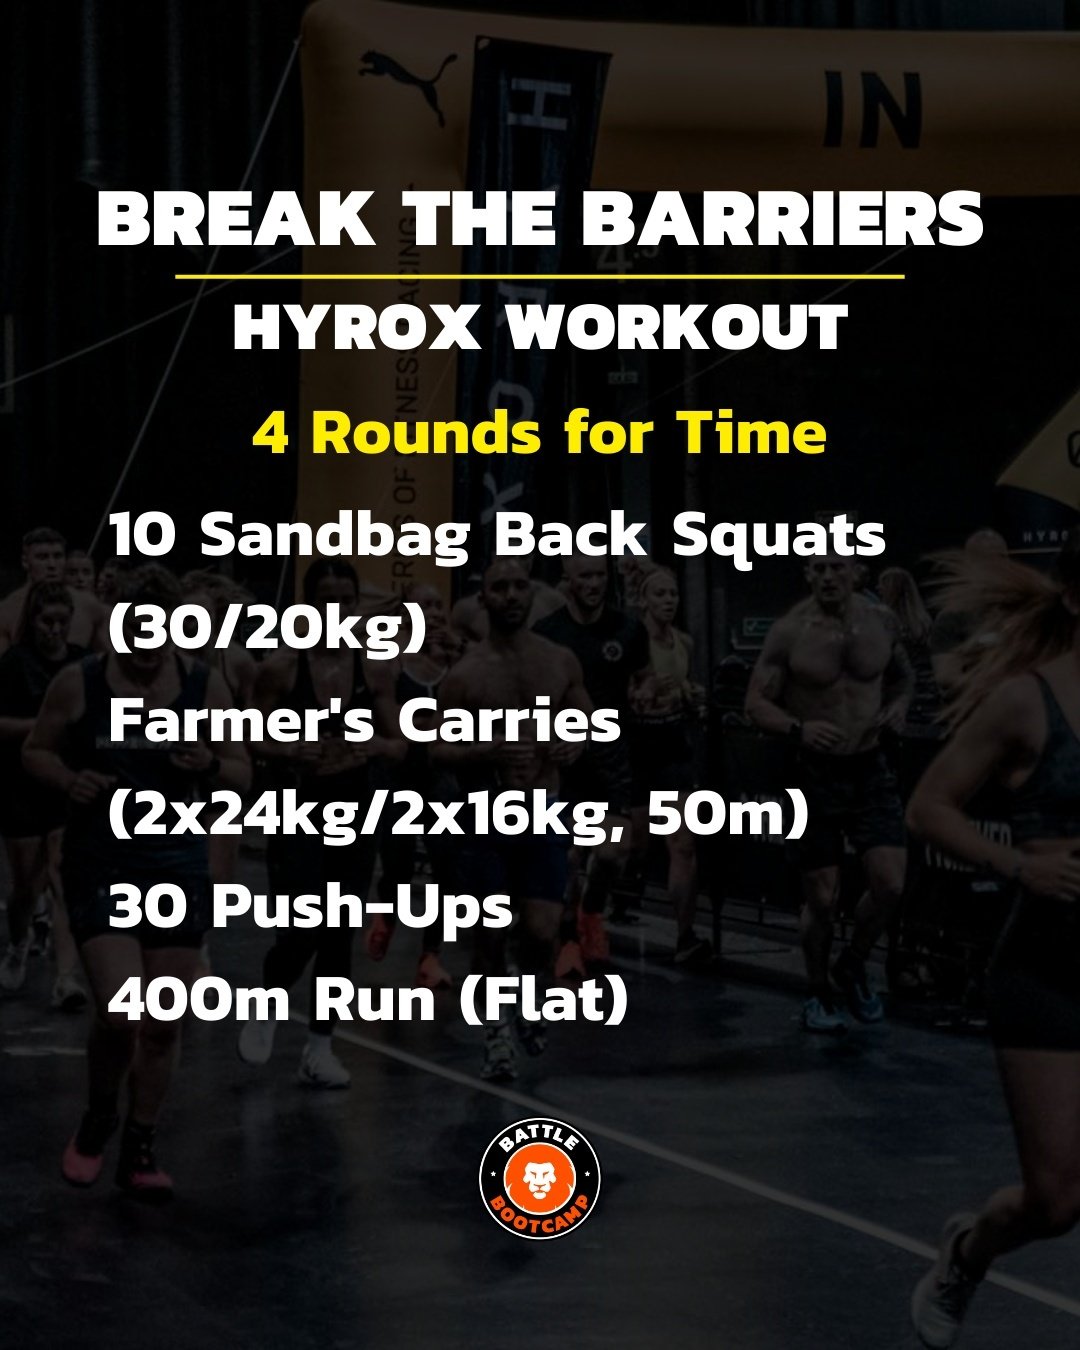 Experience the incredible Hyrox Workout and witness its power first-hand! 💥

It looks fairly straightforward, but wait until round 3 kicks in! 

⇢ 10 x Sandbag Back Squats 
⇢ Farmers Carry | 50m 
⇢ 30 Push-Ups 
⇢ 400m Run 

🏁 4 Rounds for time. 

#